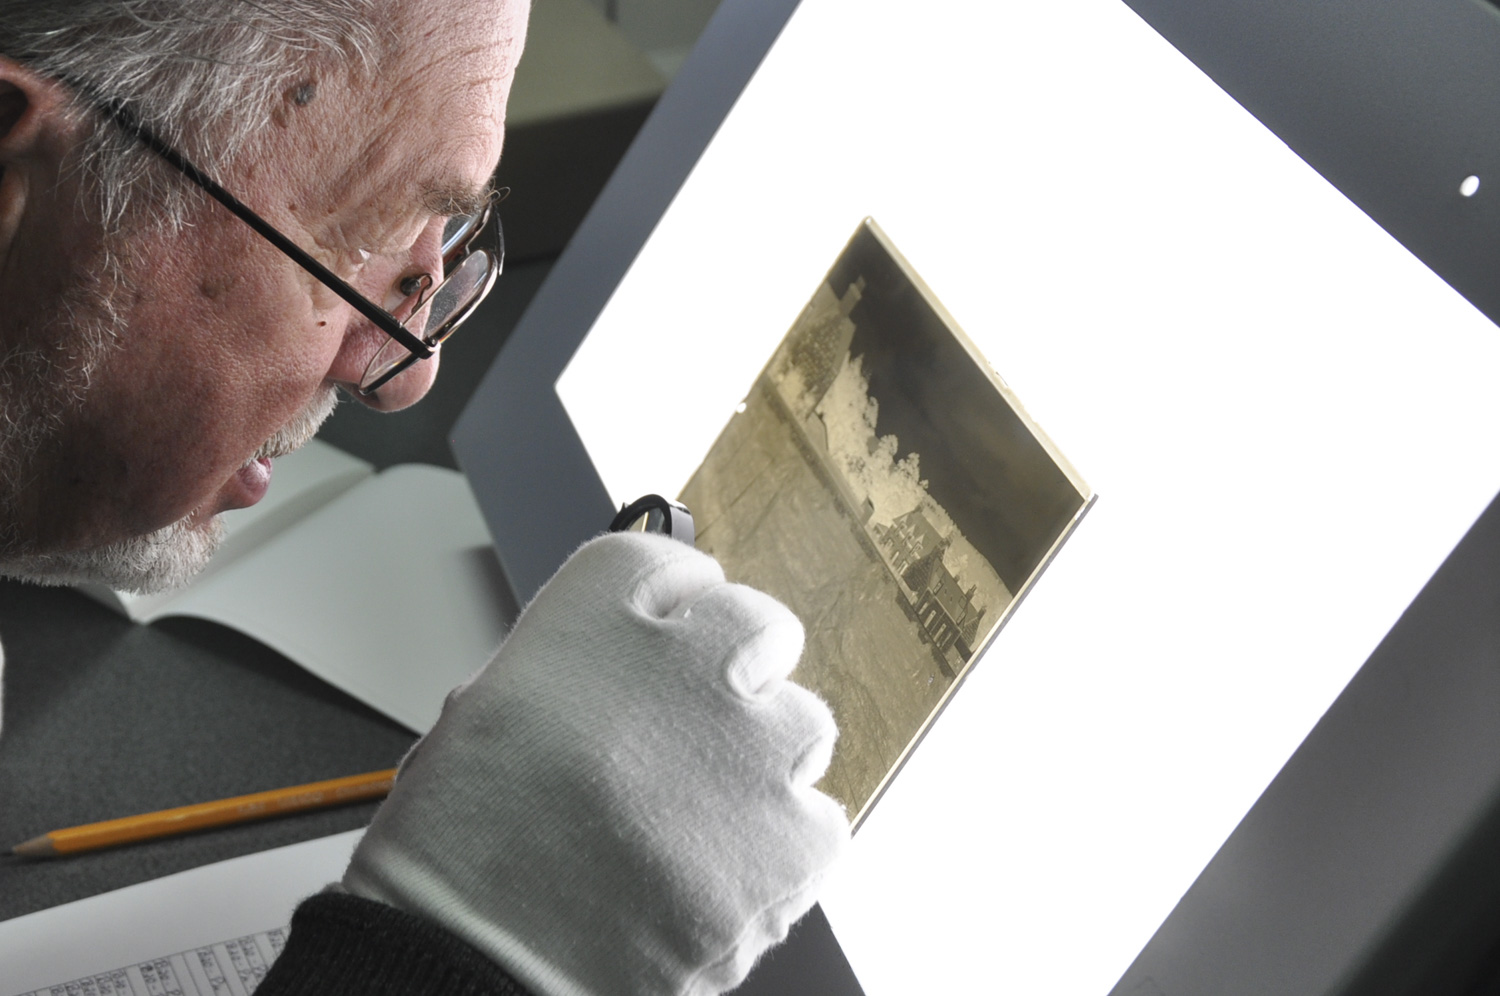 Gentleman looking closely at a glass negative on a lightbox.